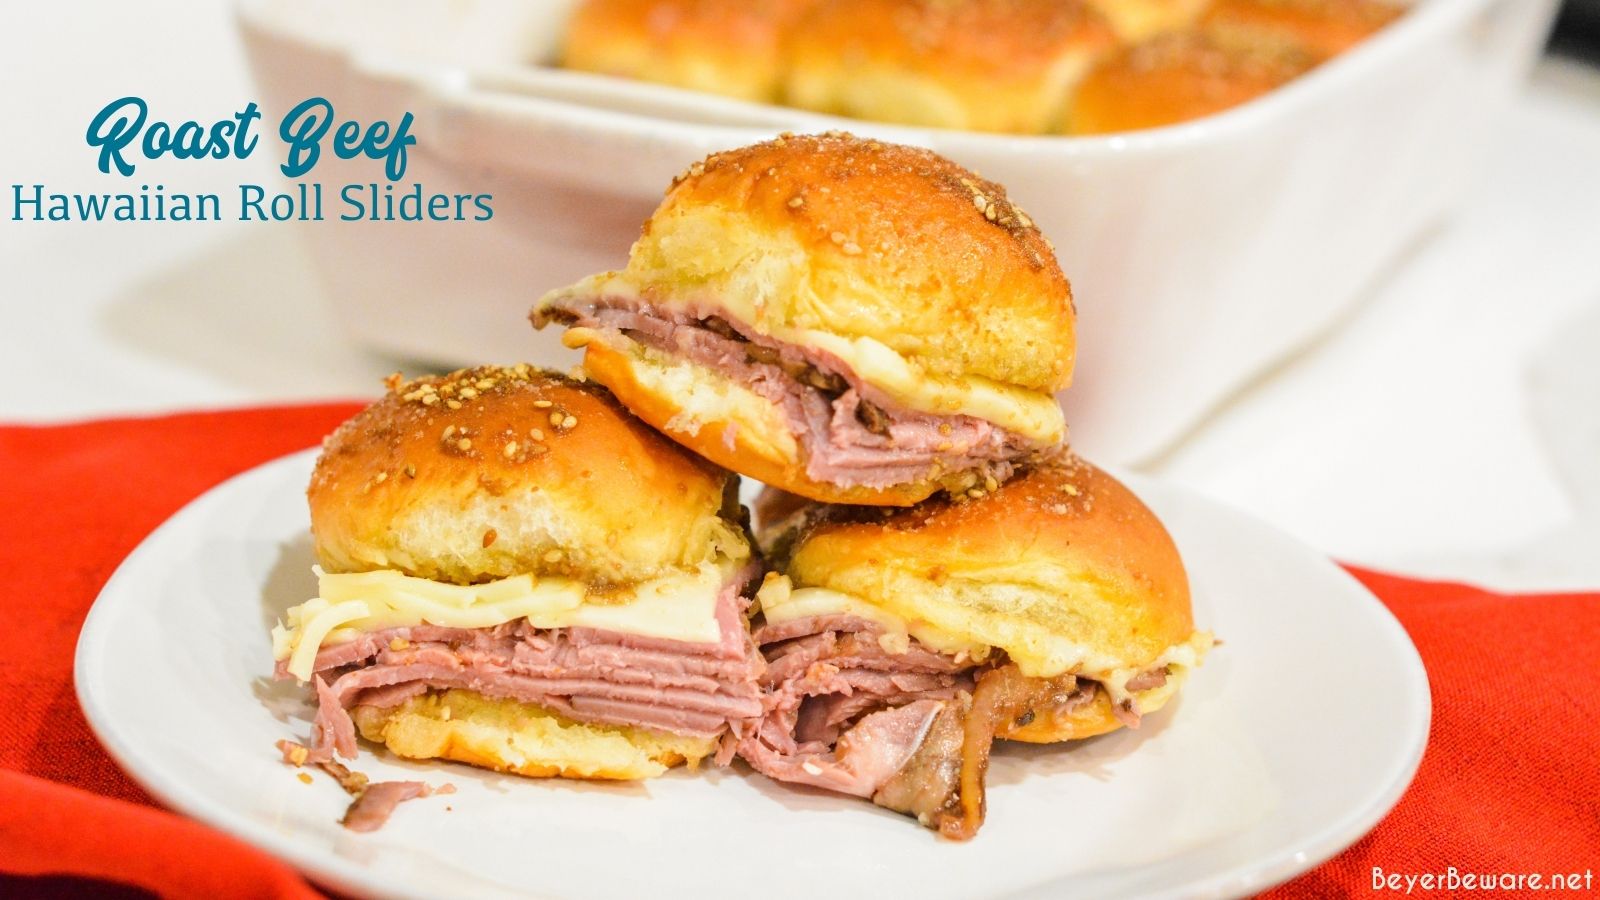 Roast beef Hawaiian roll sliders, or more affectionately called Sandy's Sandwiches, combine butter, garlic powder, Worcestershire sauce, and poppy seeds for a butter glaze that compliments these baked roast beef and cheese sandwiches.